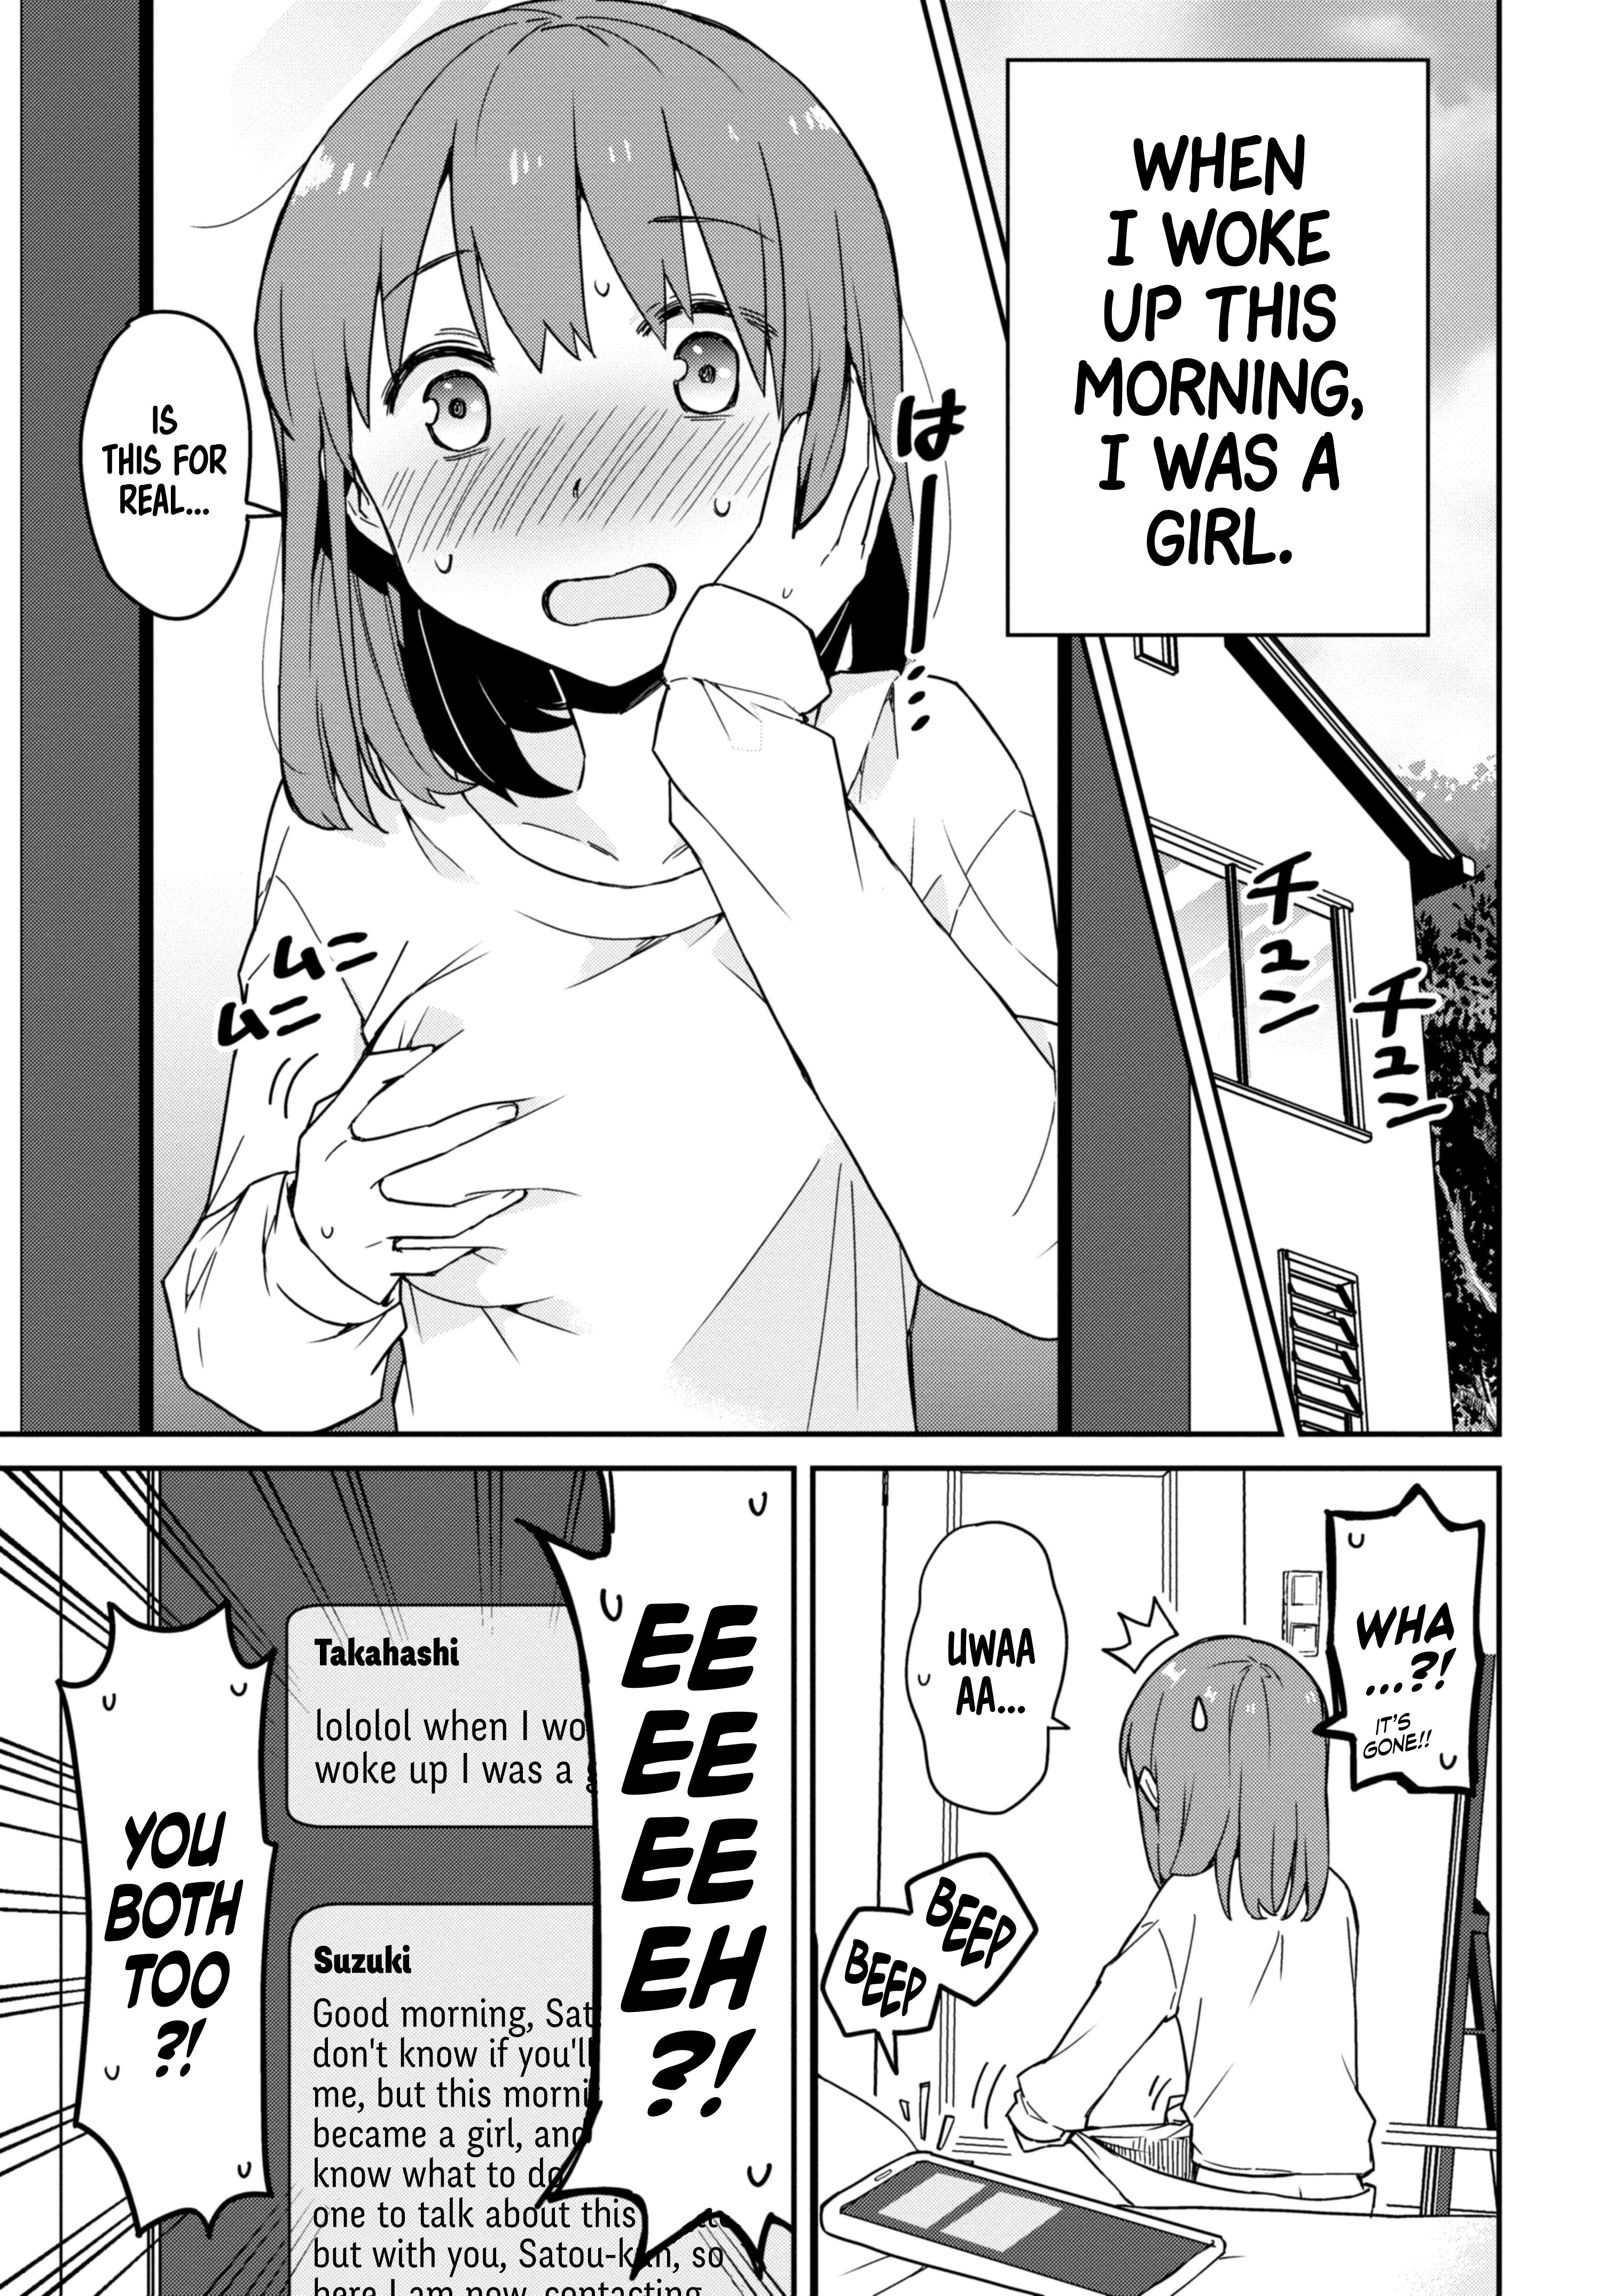 A Story About High School Boys Who Woke Up As Girls One Morning - Page 1